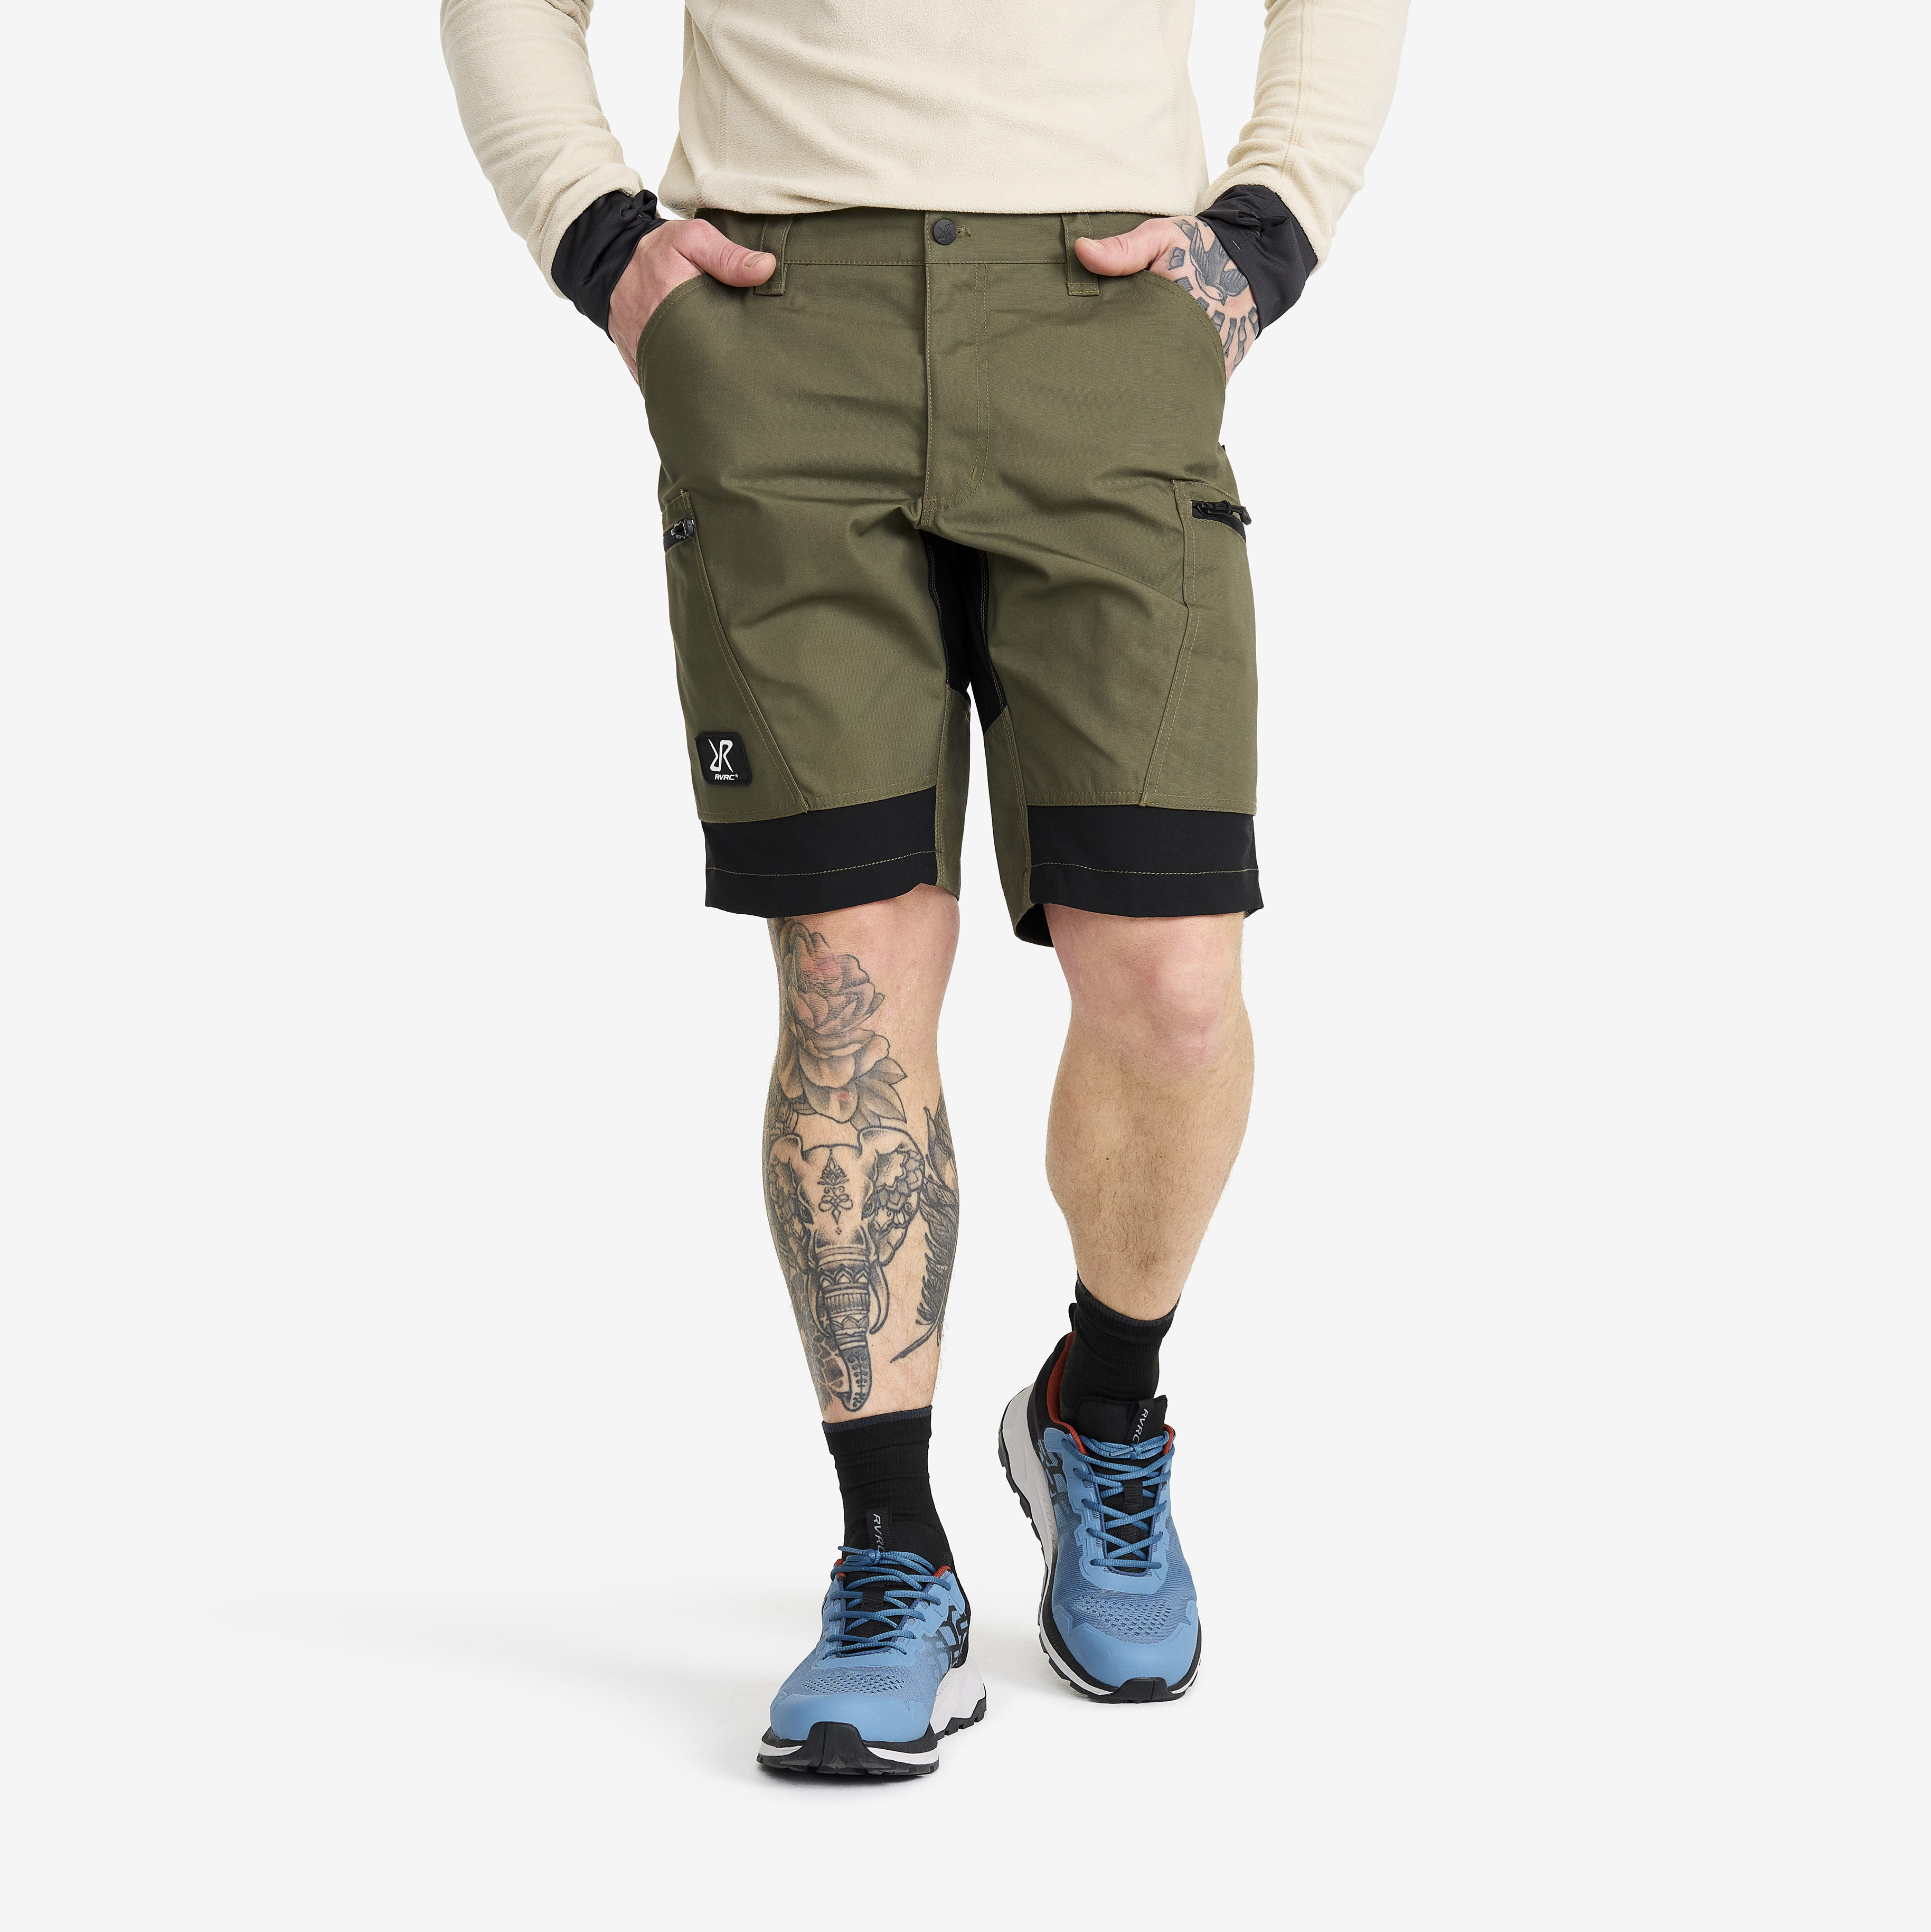 Nordwand Shorts Olive Night Hombres